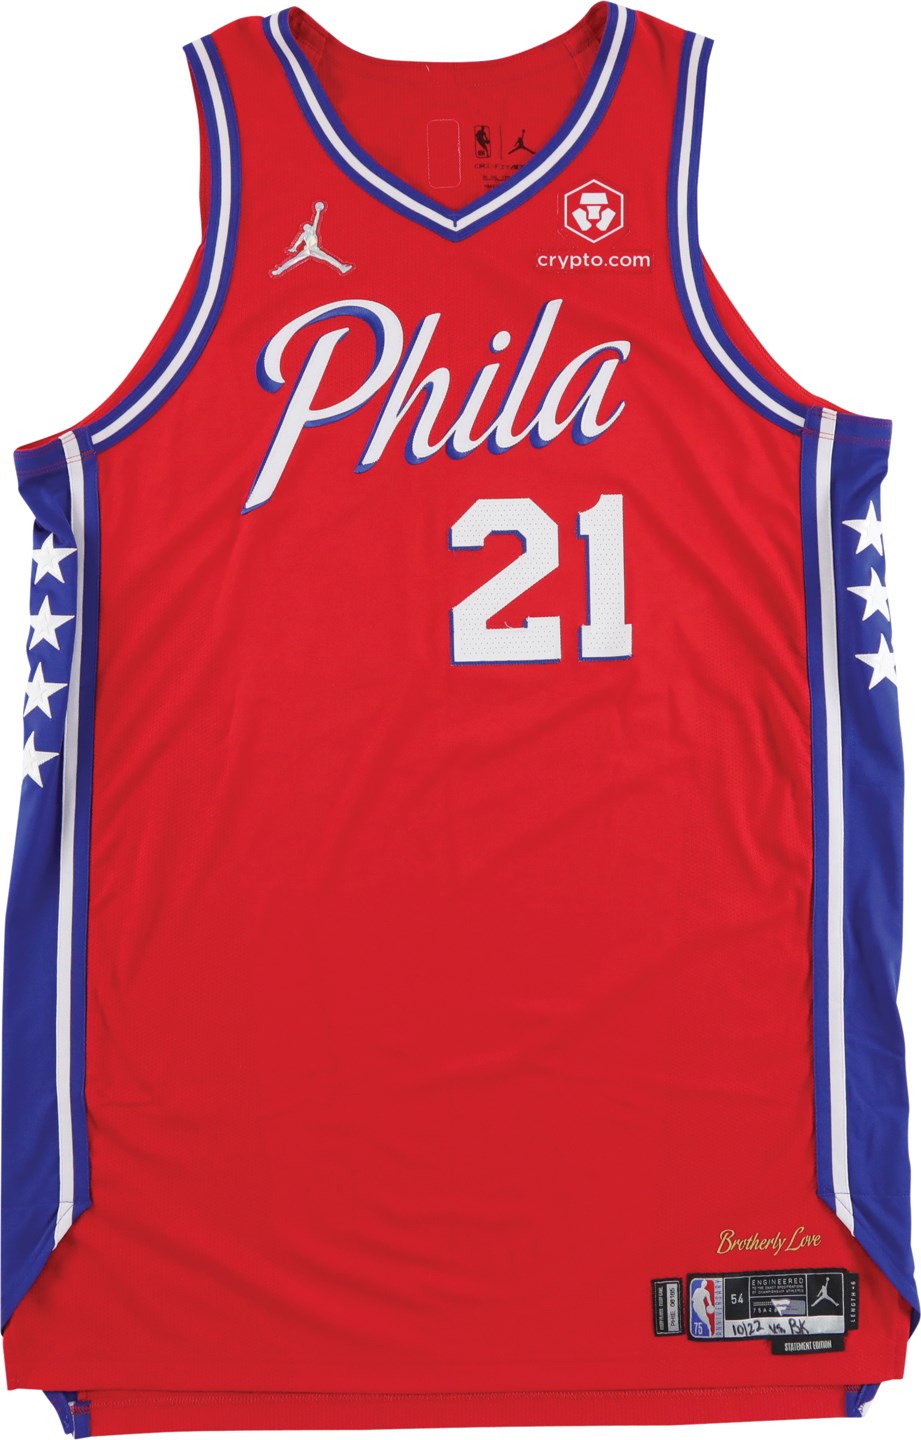 - 10/22/21 Joel Embiid Philadelphia 76ers Game Worn Red Statement Jersey - First Home Game of the Season (Photo-Matched & Fanatics 76ers COA)